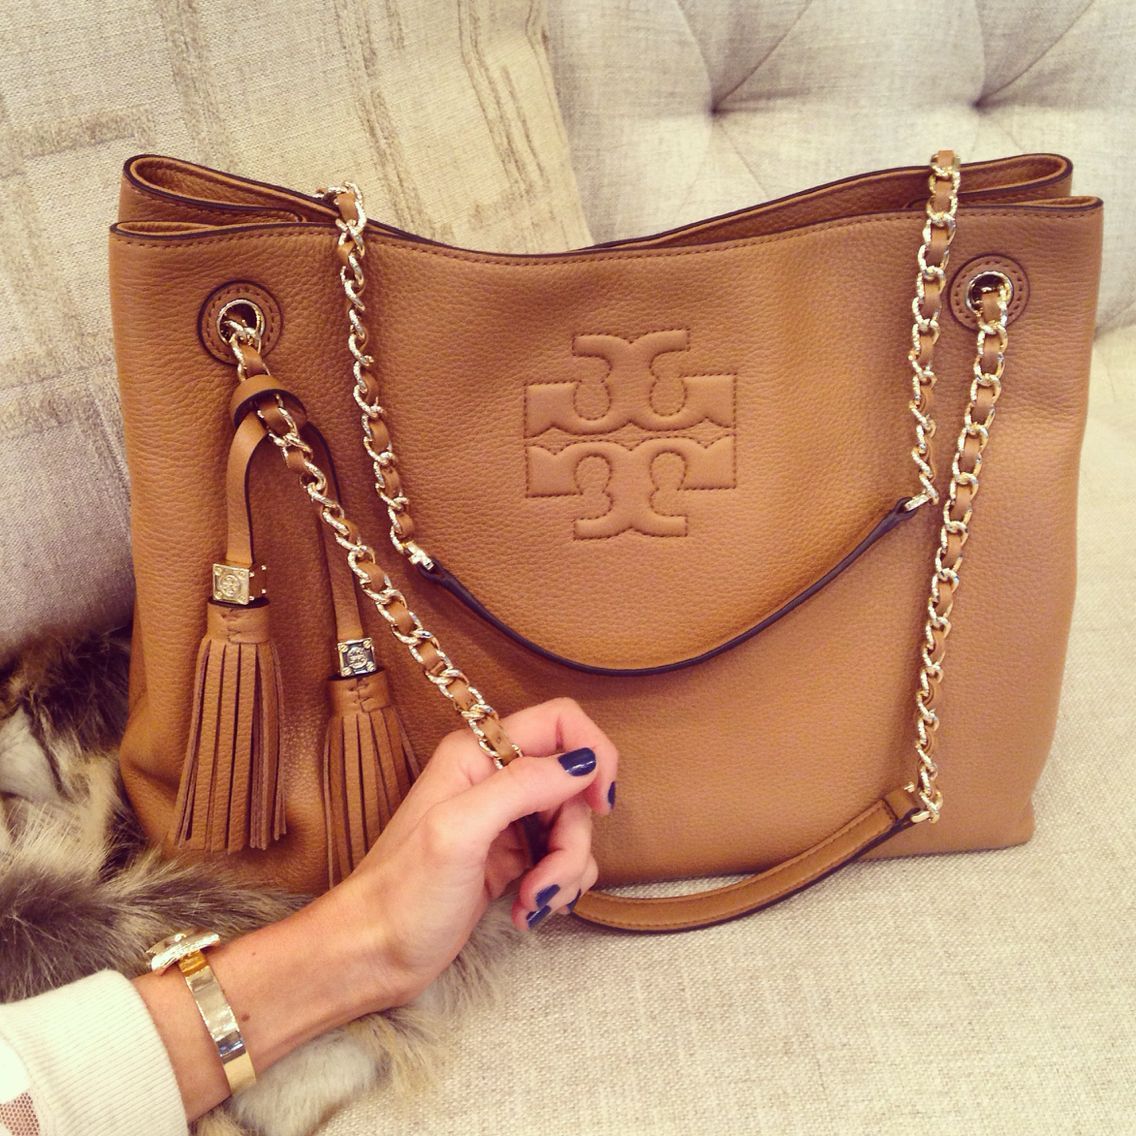 Tory Burch ‘Thea’ Shoulder Tote…had my eye on this for a while!